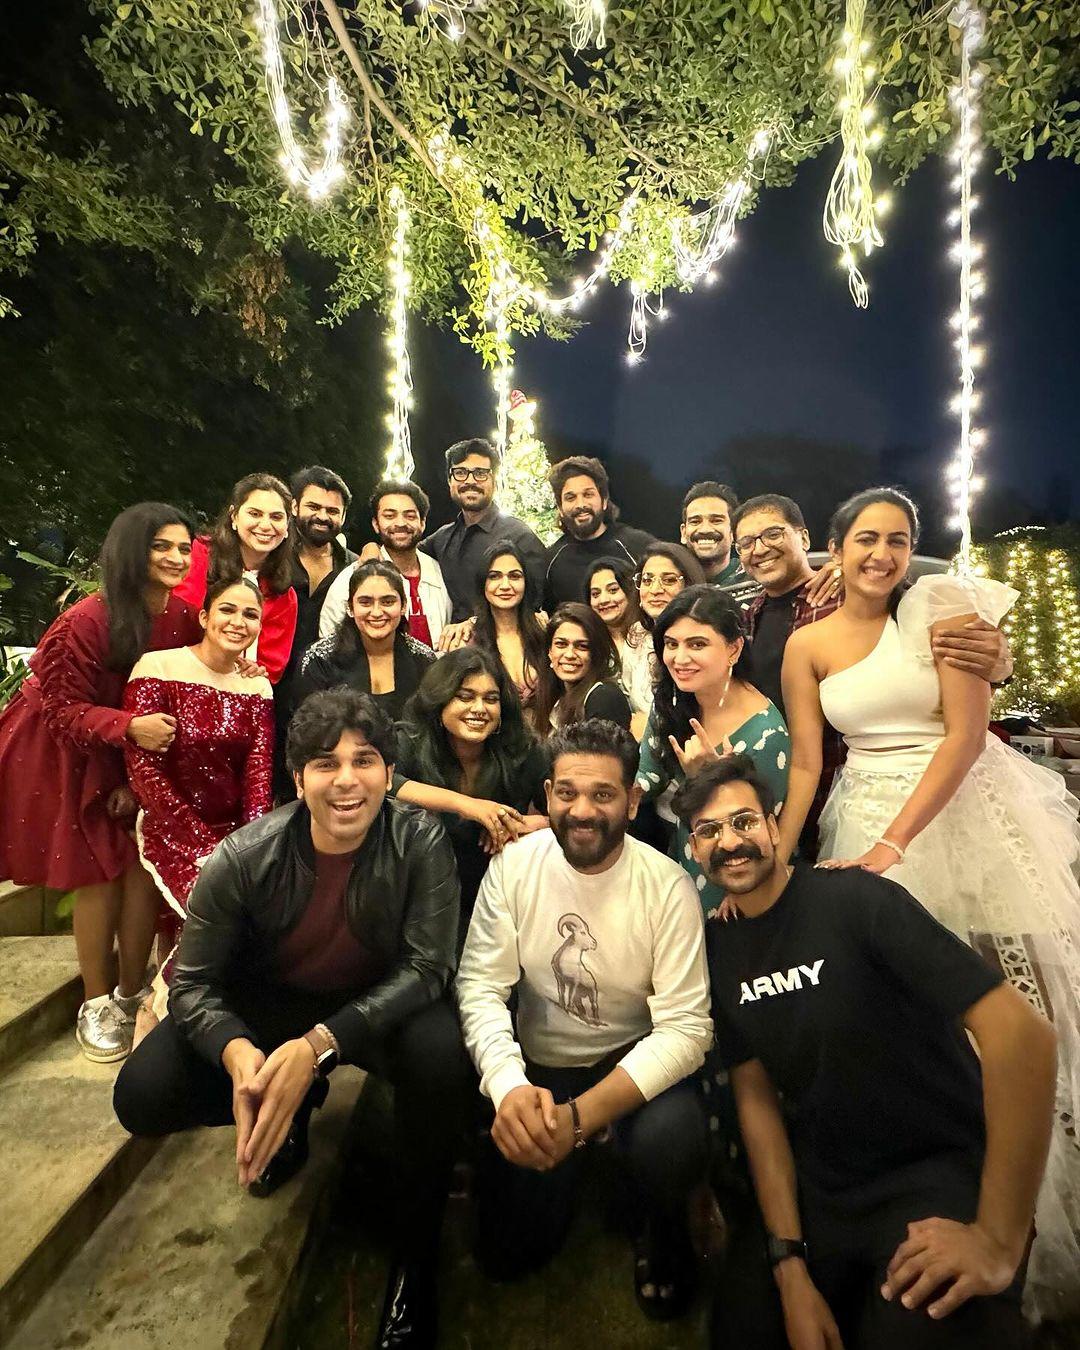 Much like every year, the All-Konidela family got together for Christmas to spend quality time together